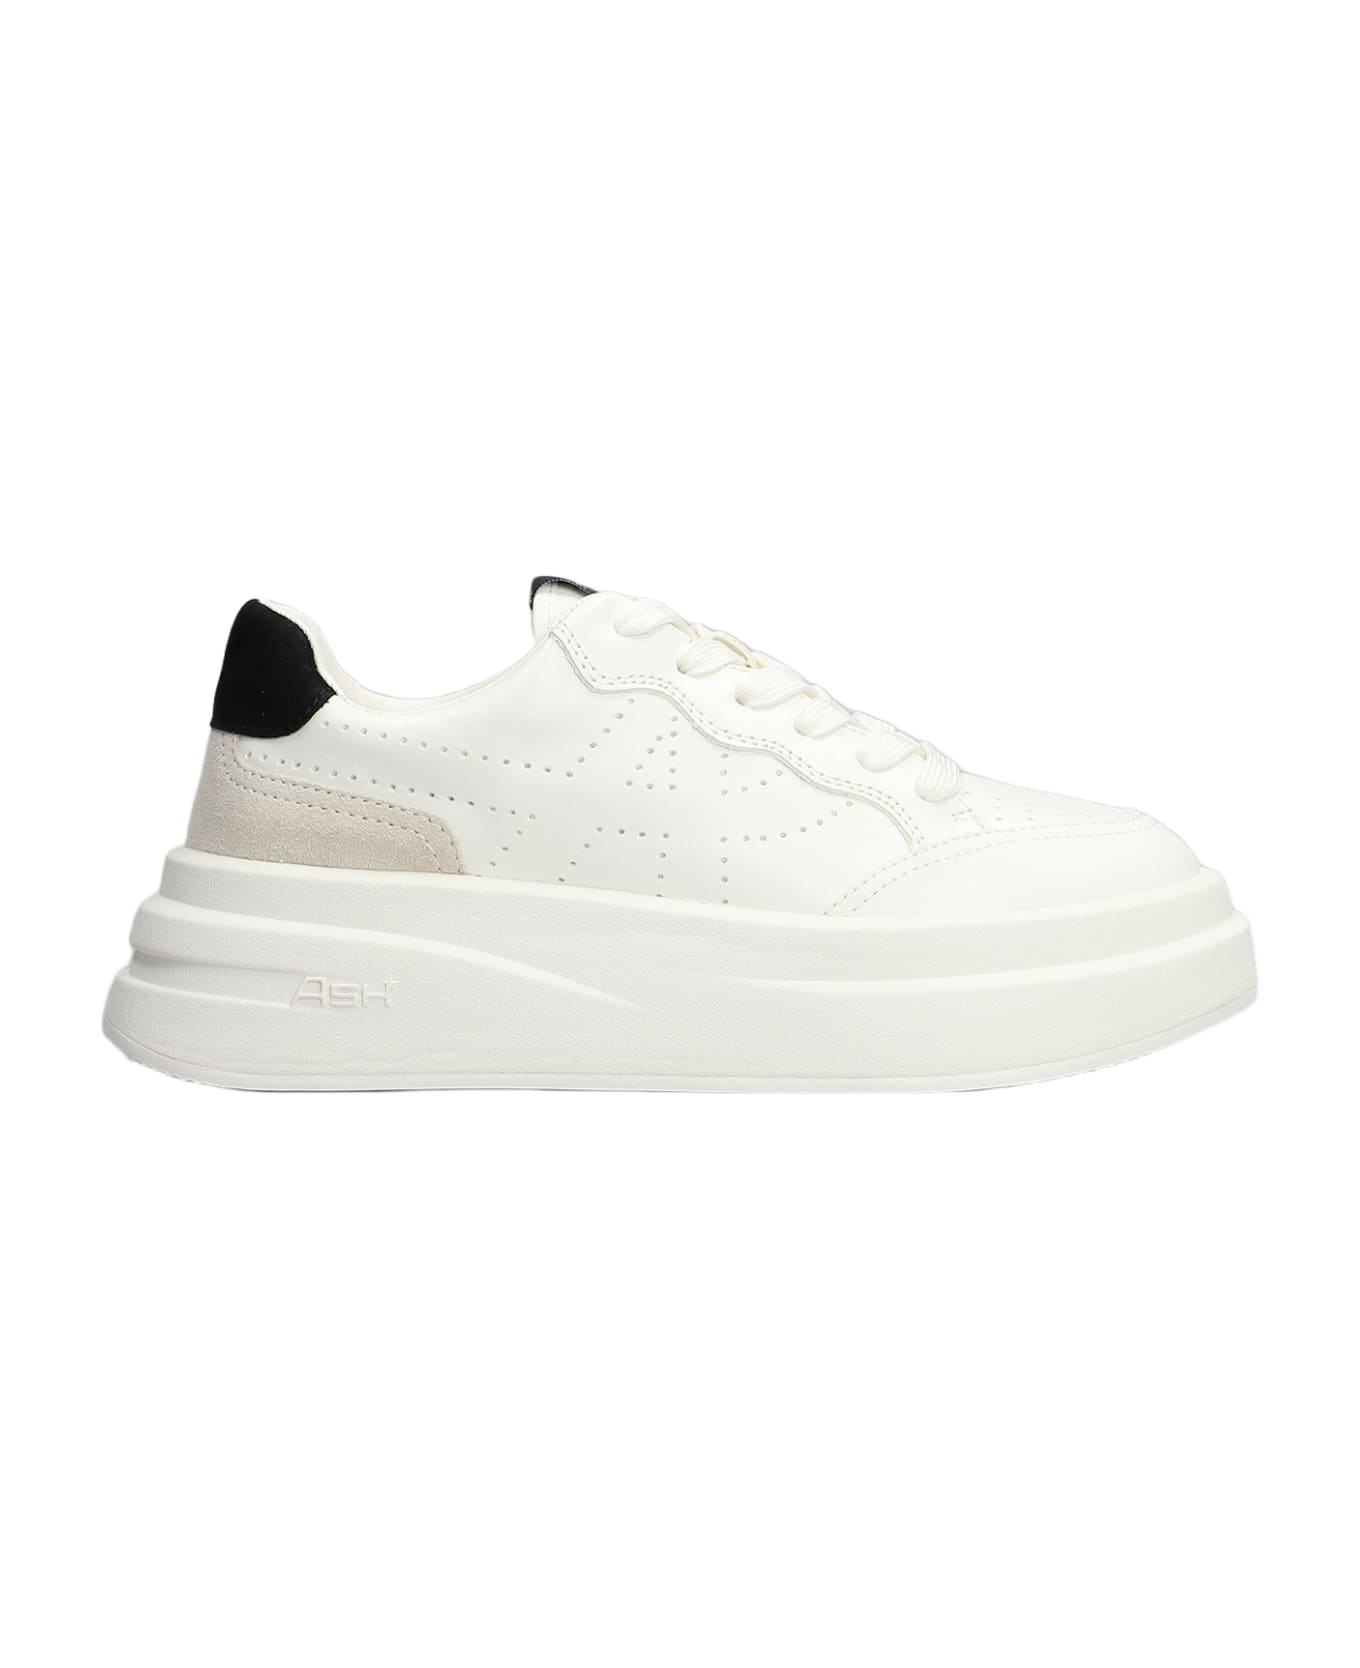 Ash Impuls Sneakers In White Leather - white ウェッジシューズ